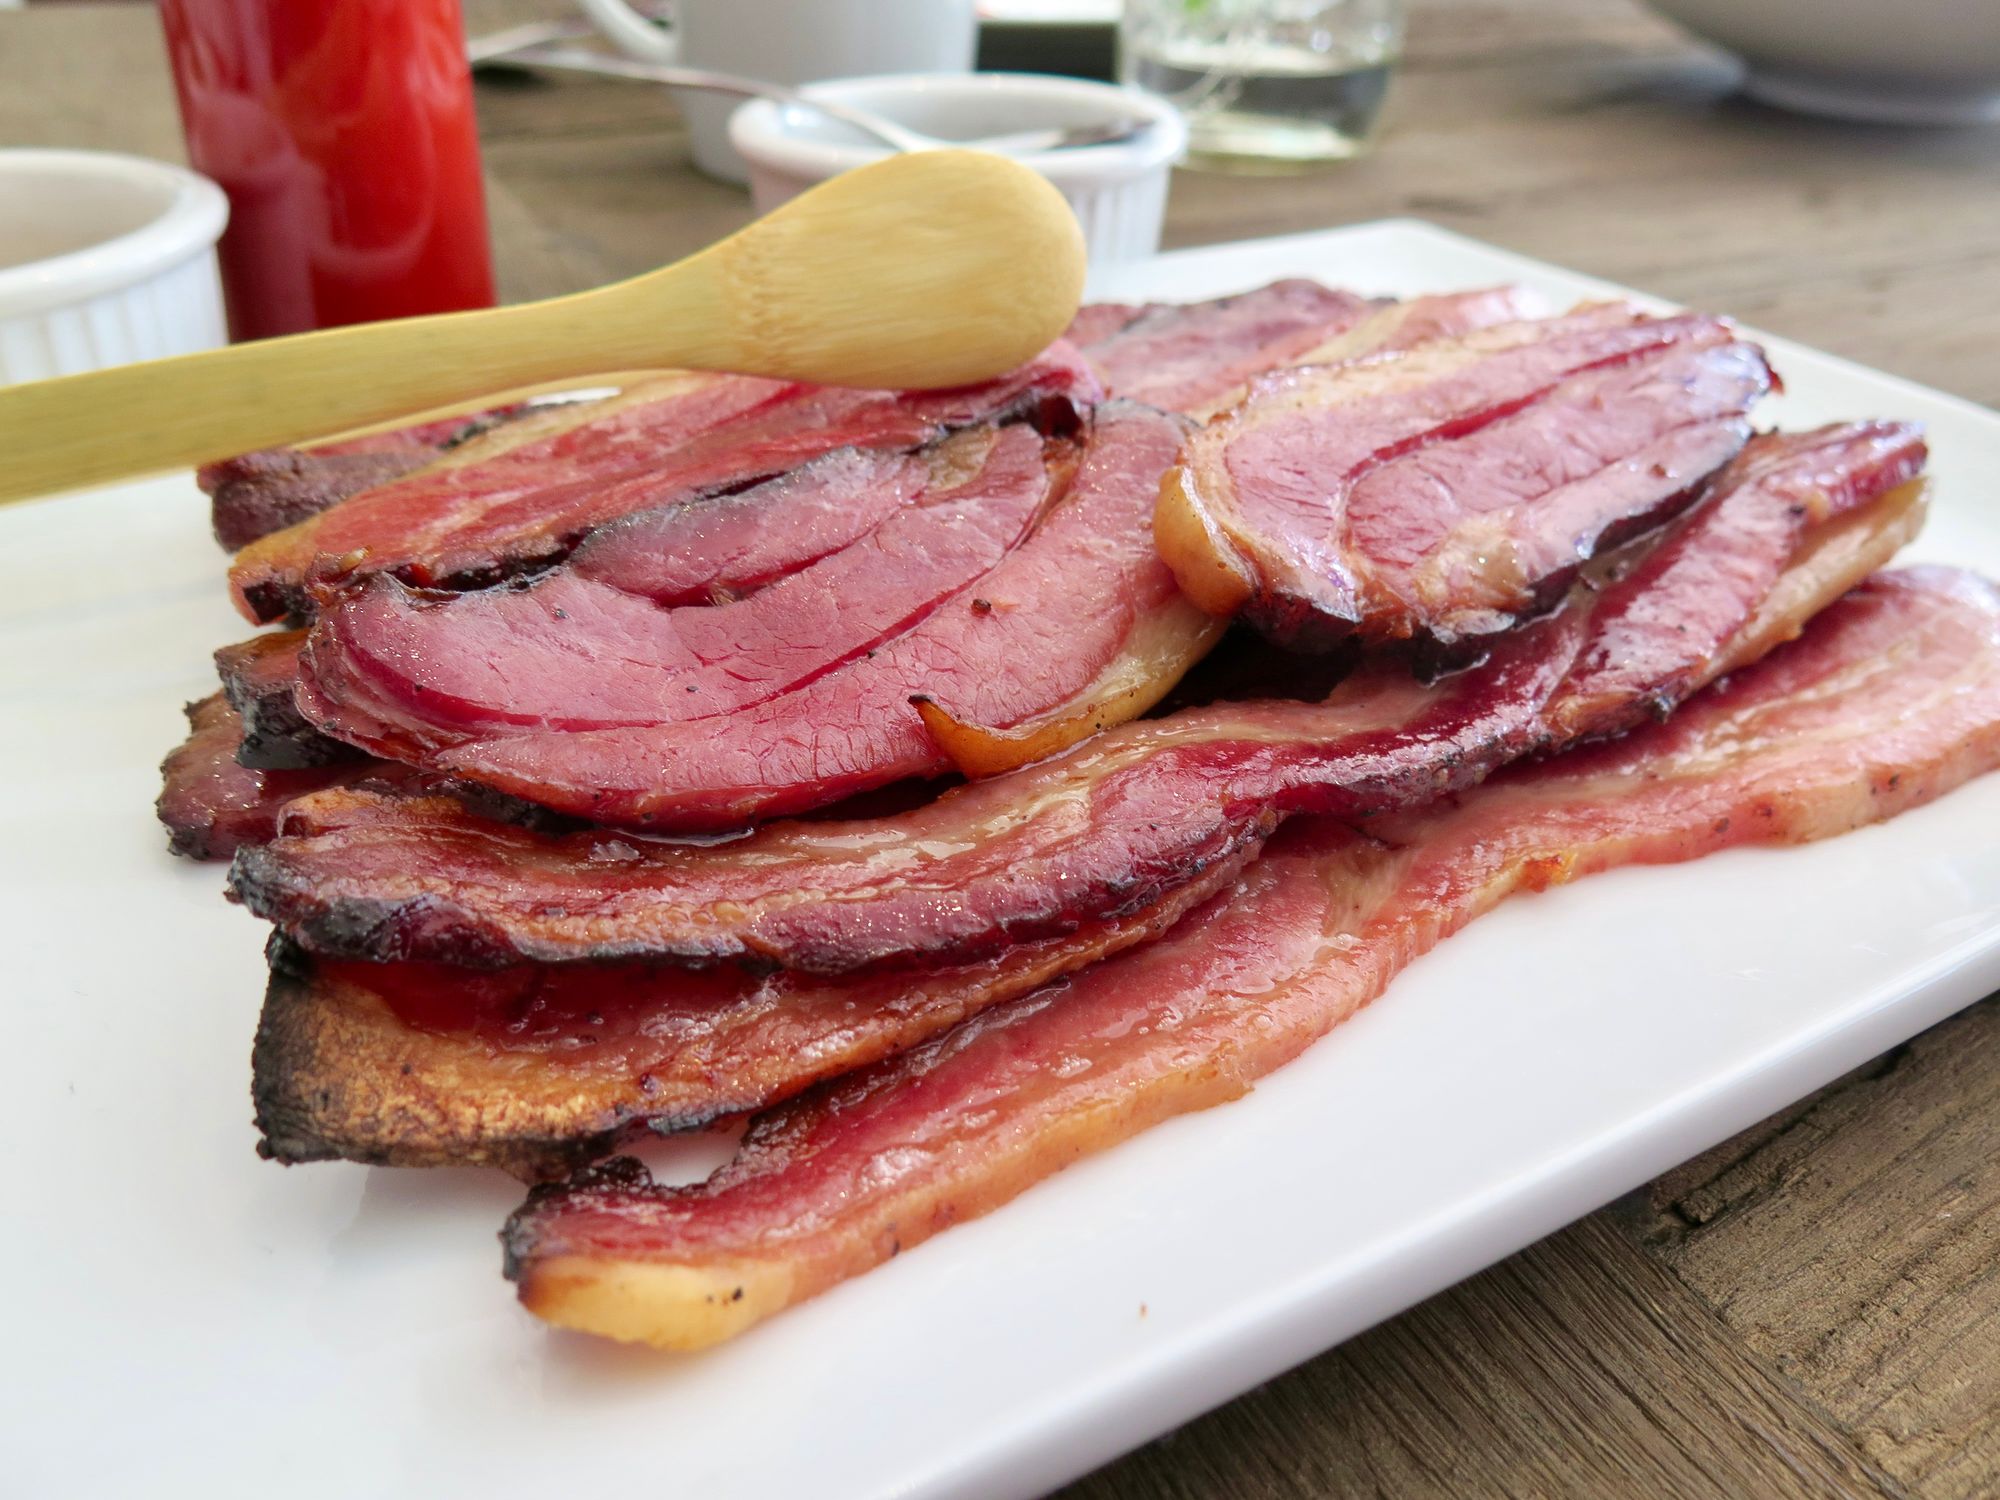 Thick-sliced house bacon